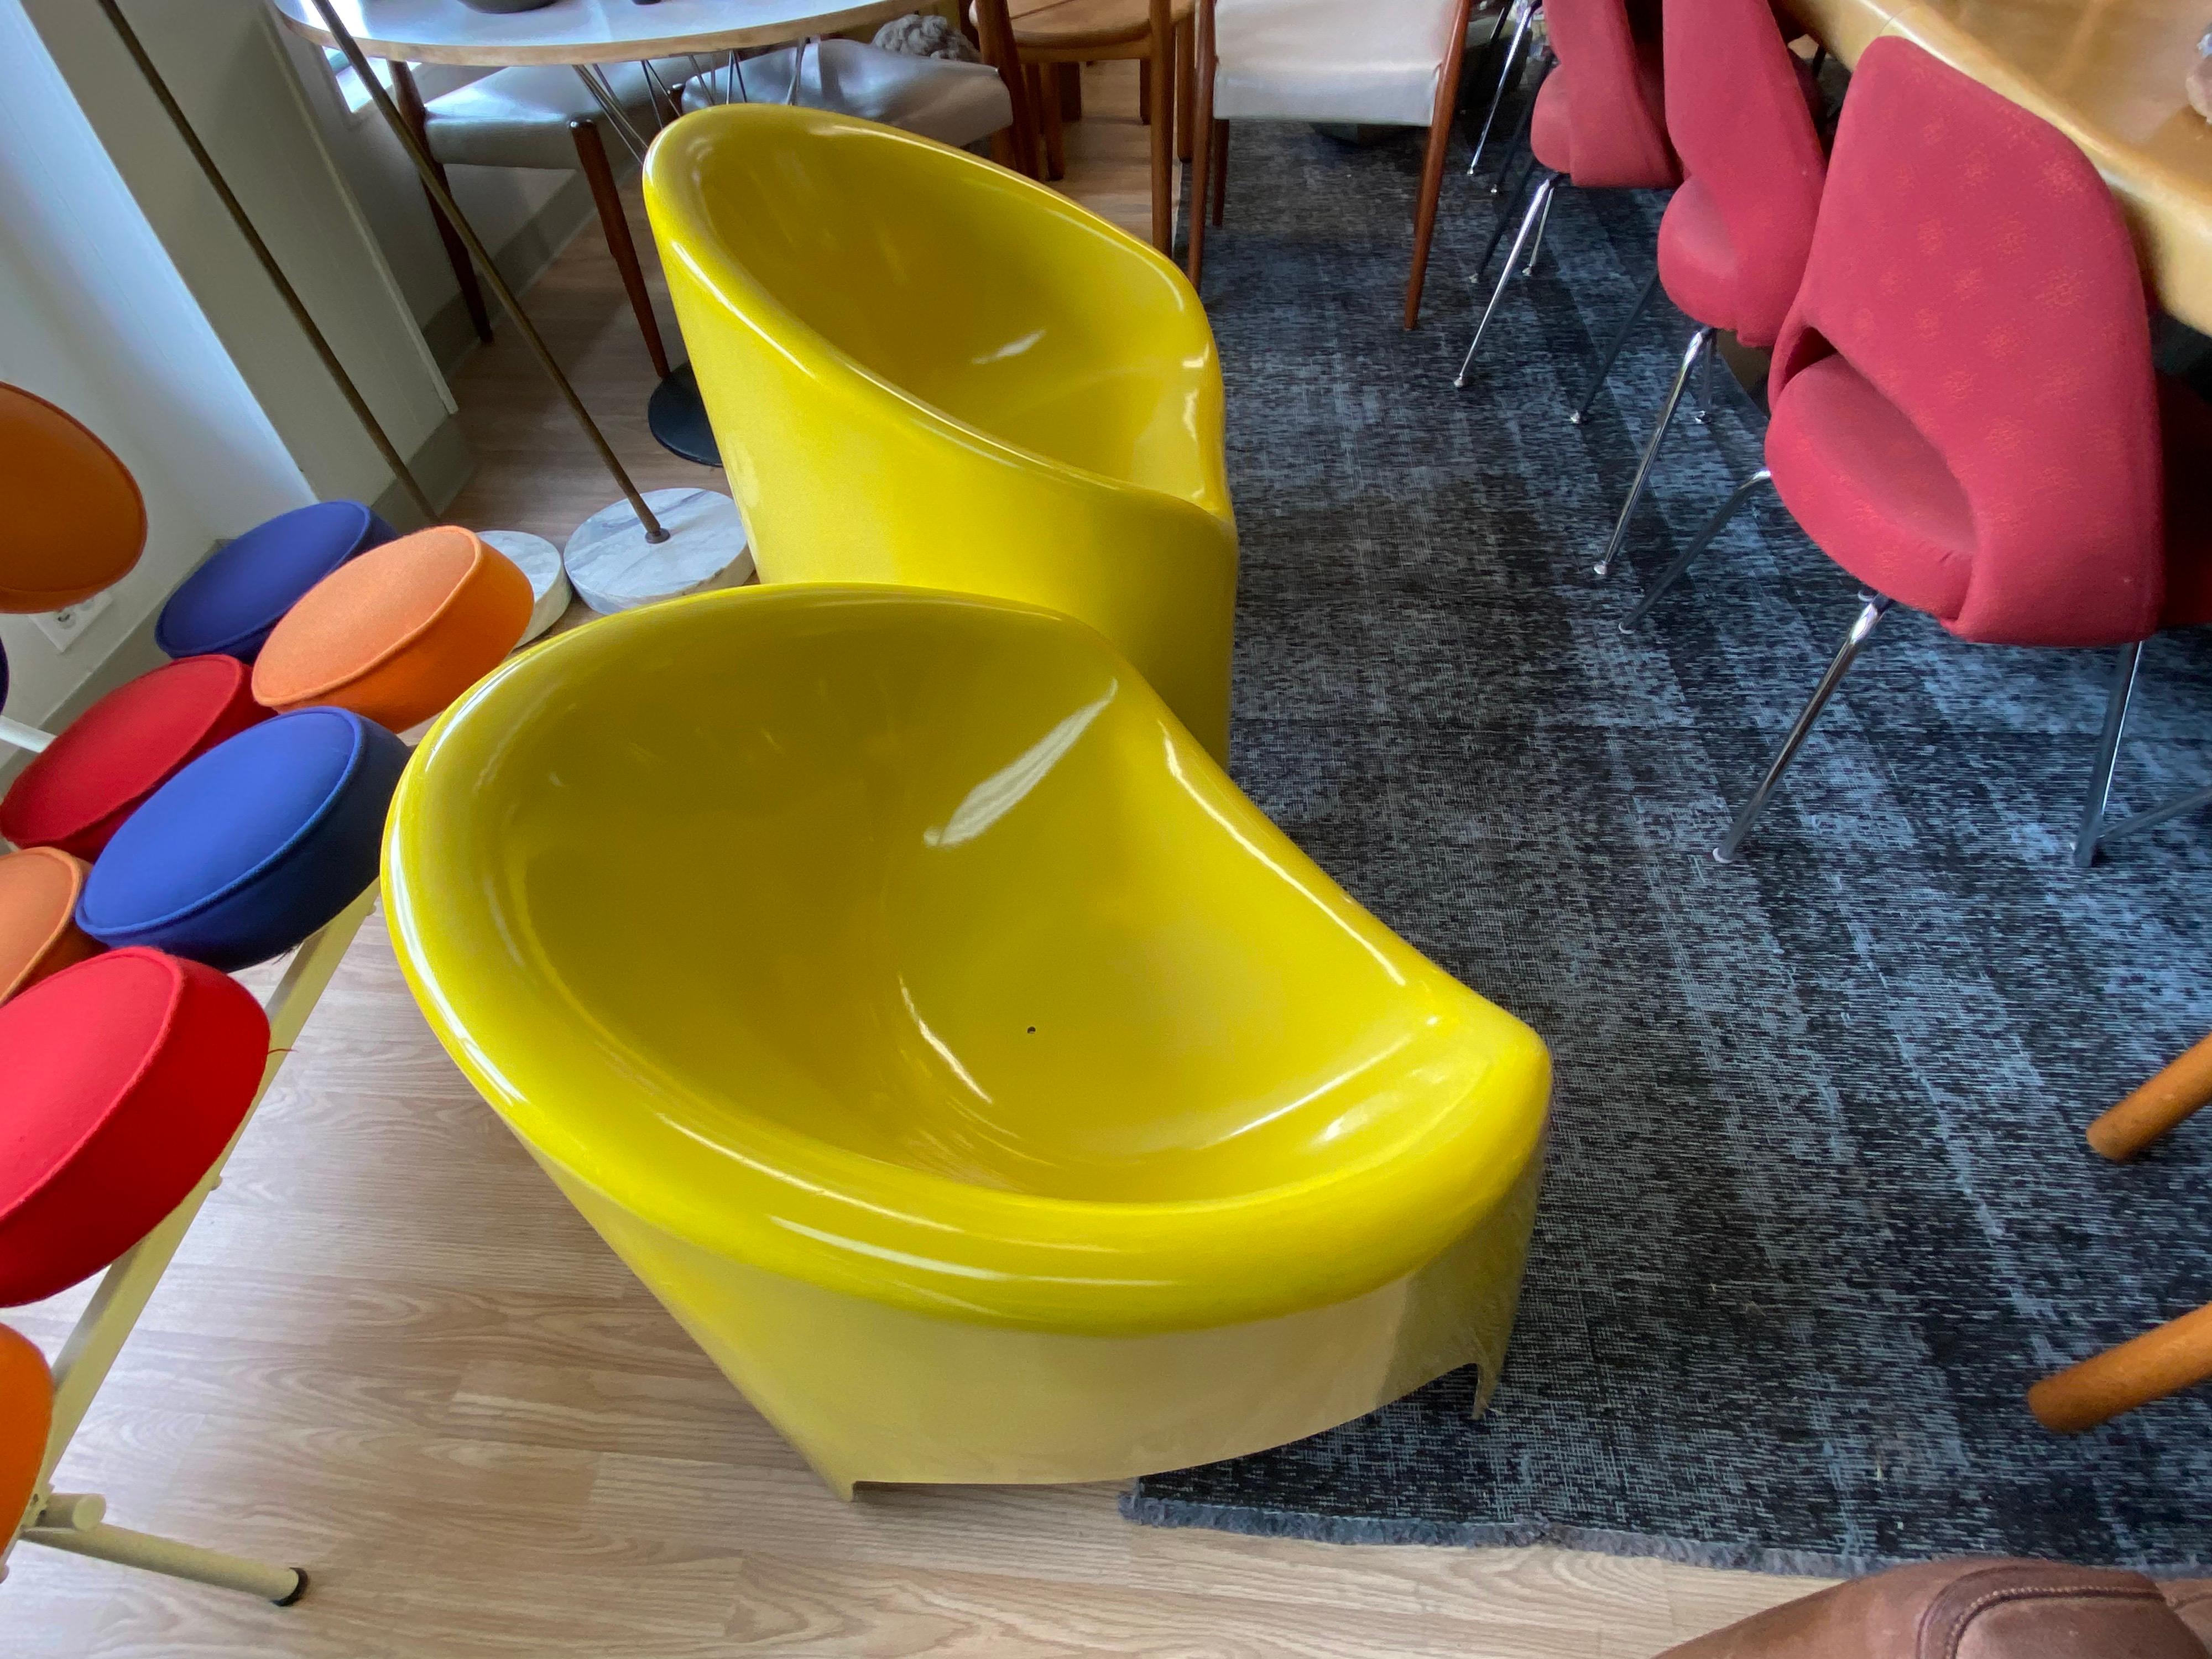 Pair of mid-century yellow fiberglass sculptural lounge chairs made by Fibrella. These vibrant lounge chairs can be used as outdoor patio furniture or indoors. Fibrella, La Baron of Ontario CA produced a line of outdoor furniture from around the